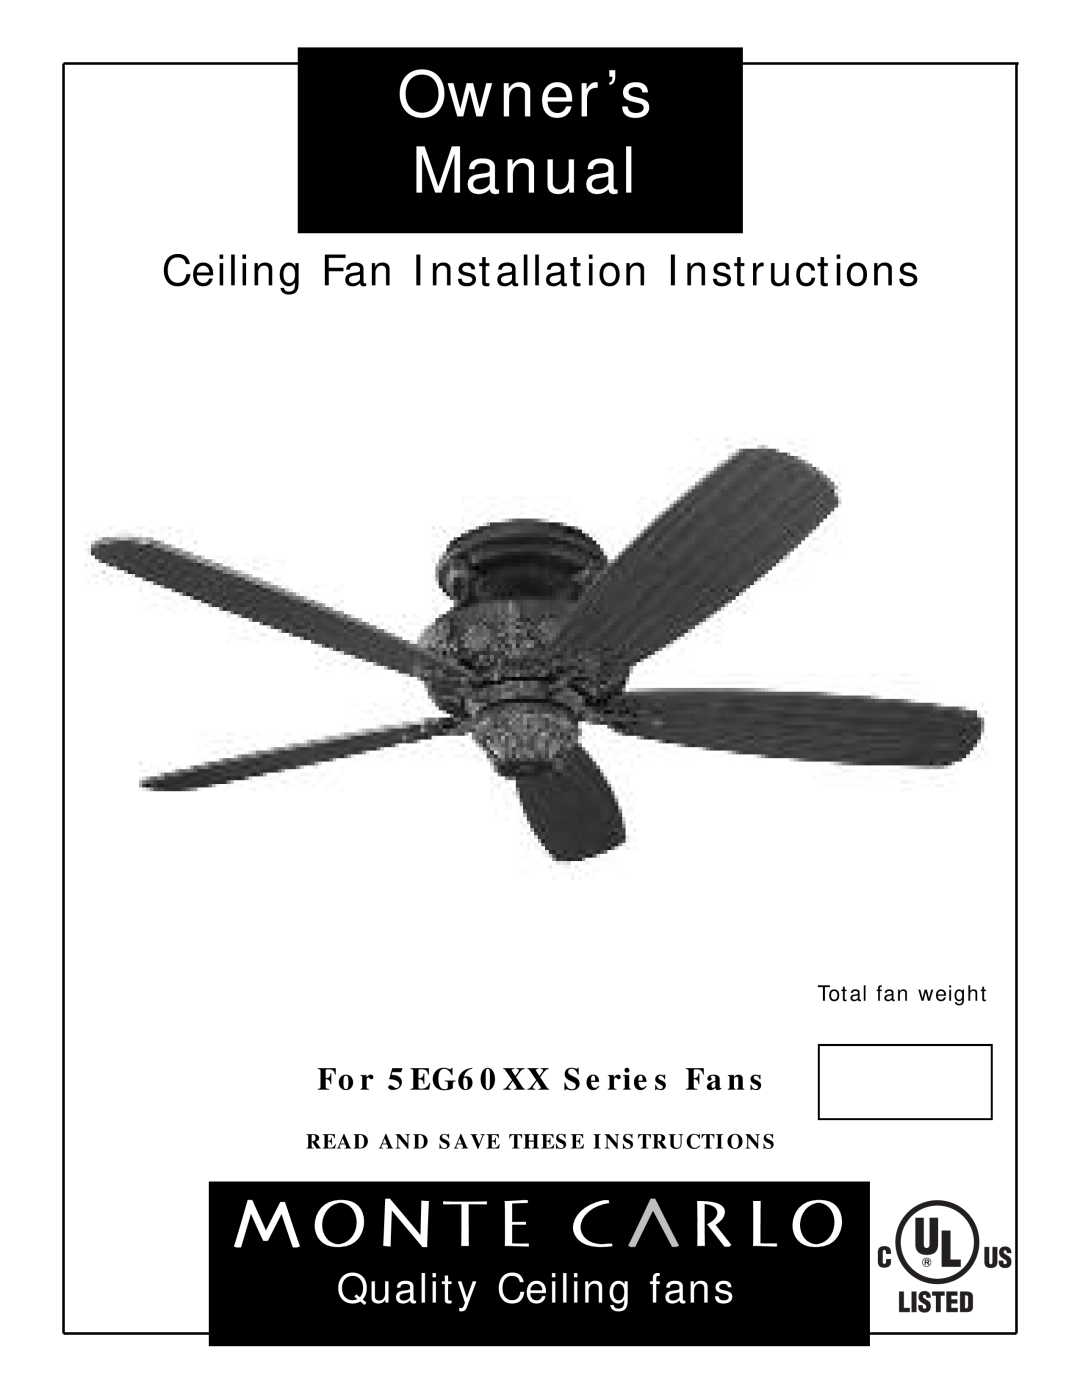 Monte Carlo Fan Company 5EG60XX Series owner manual Read And Save These Instructions, Quality Ceiling fans 